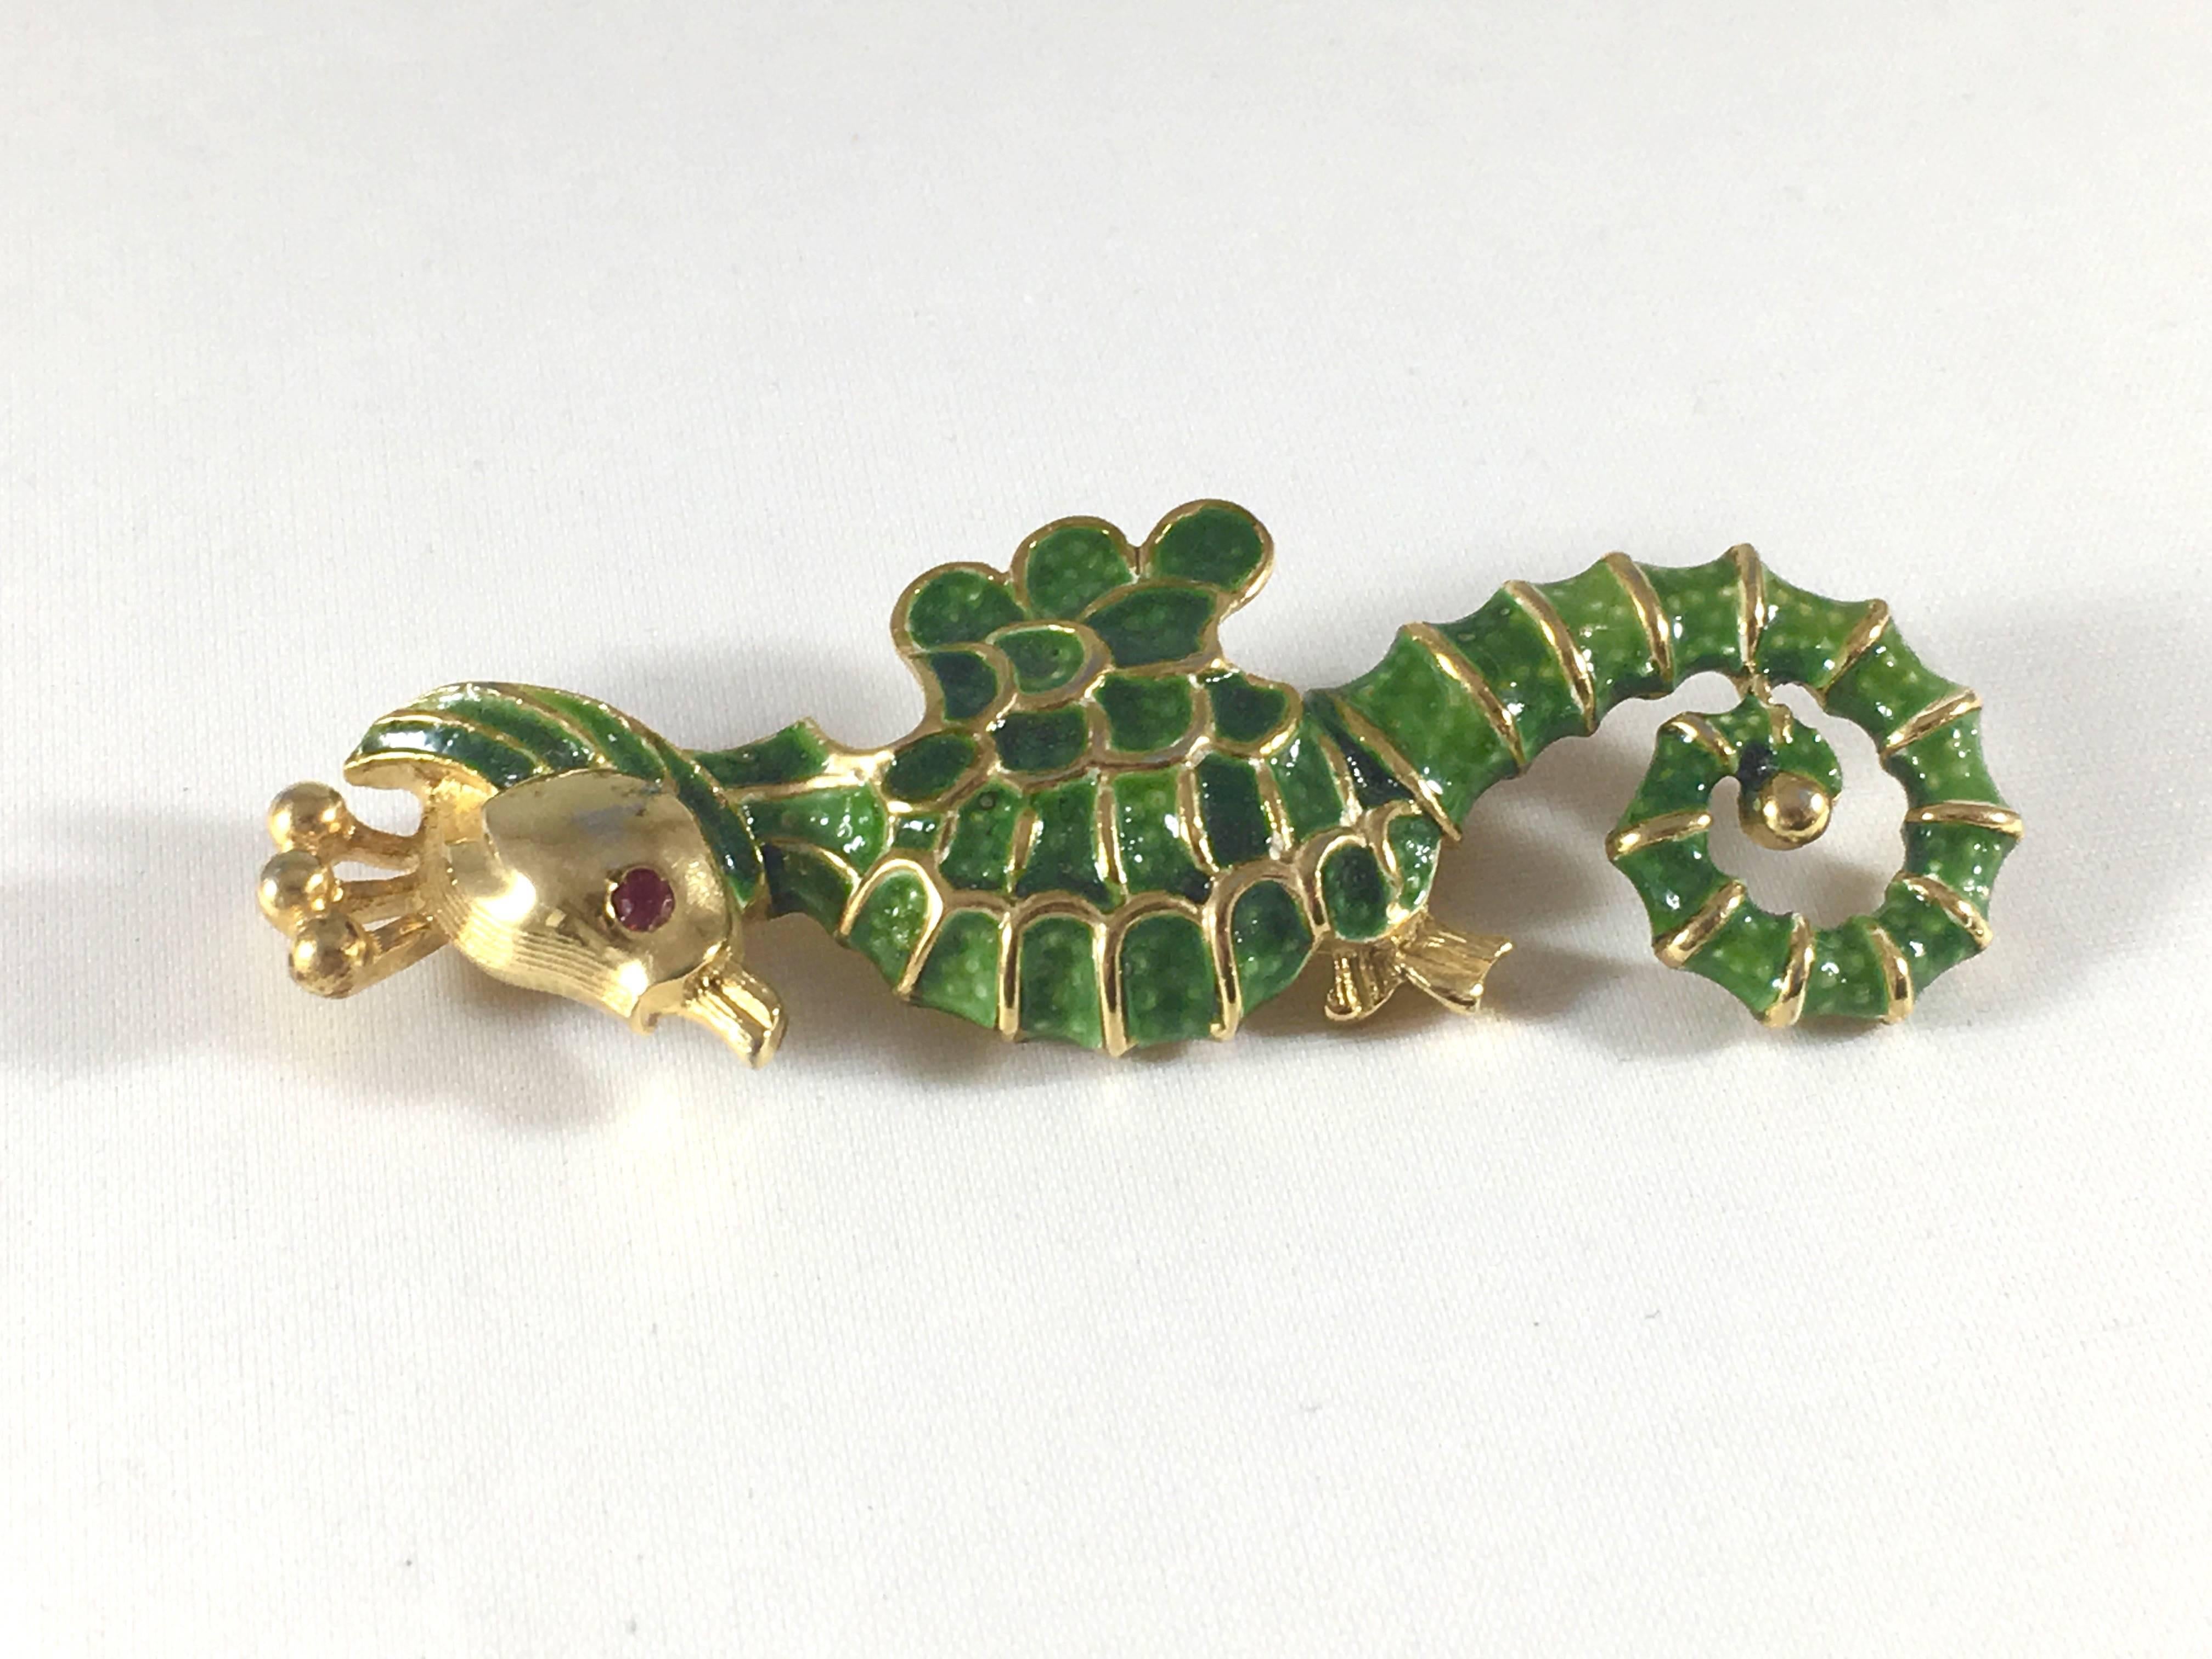 This adorable seahorse brooch was made by Kenneth Jay Lane in the 1960s. It is a gold-tone metal with green enamel and a red rhinestone used for the eye.
It is marked on the back with 'K.J.L.' - the earliest mark used by Kenneth Jay Lane which dates